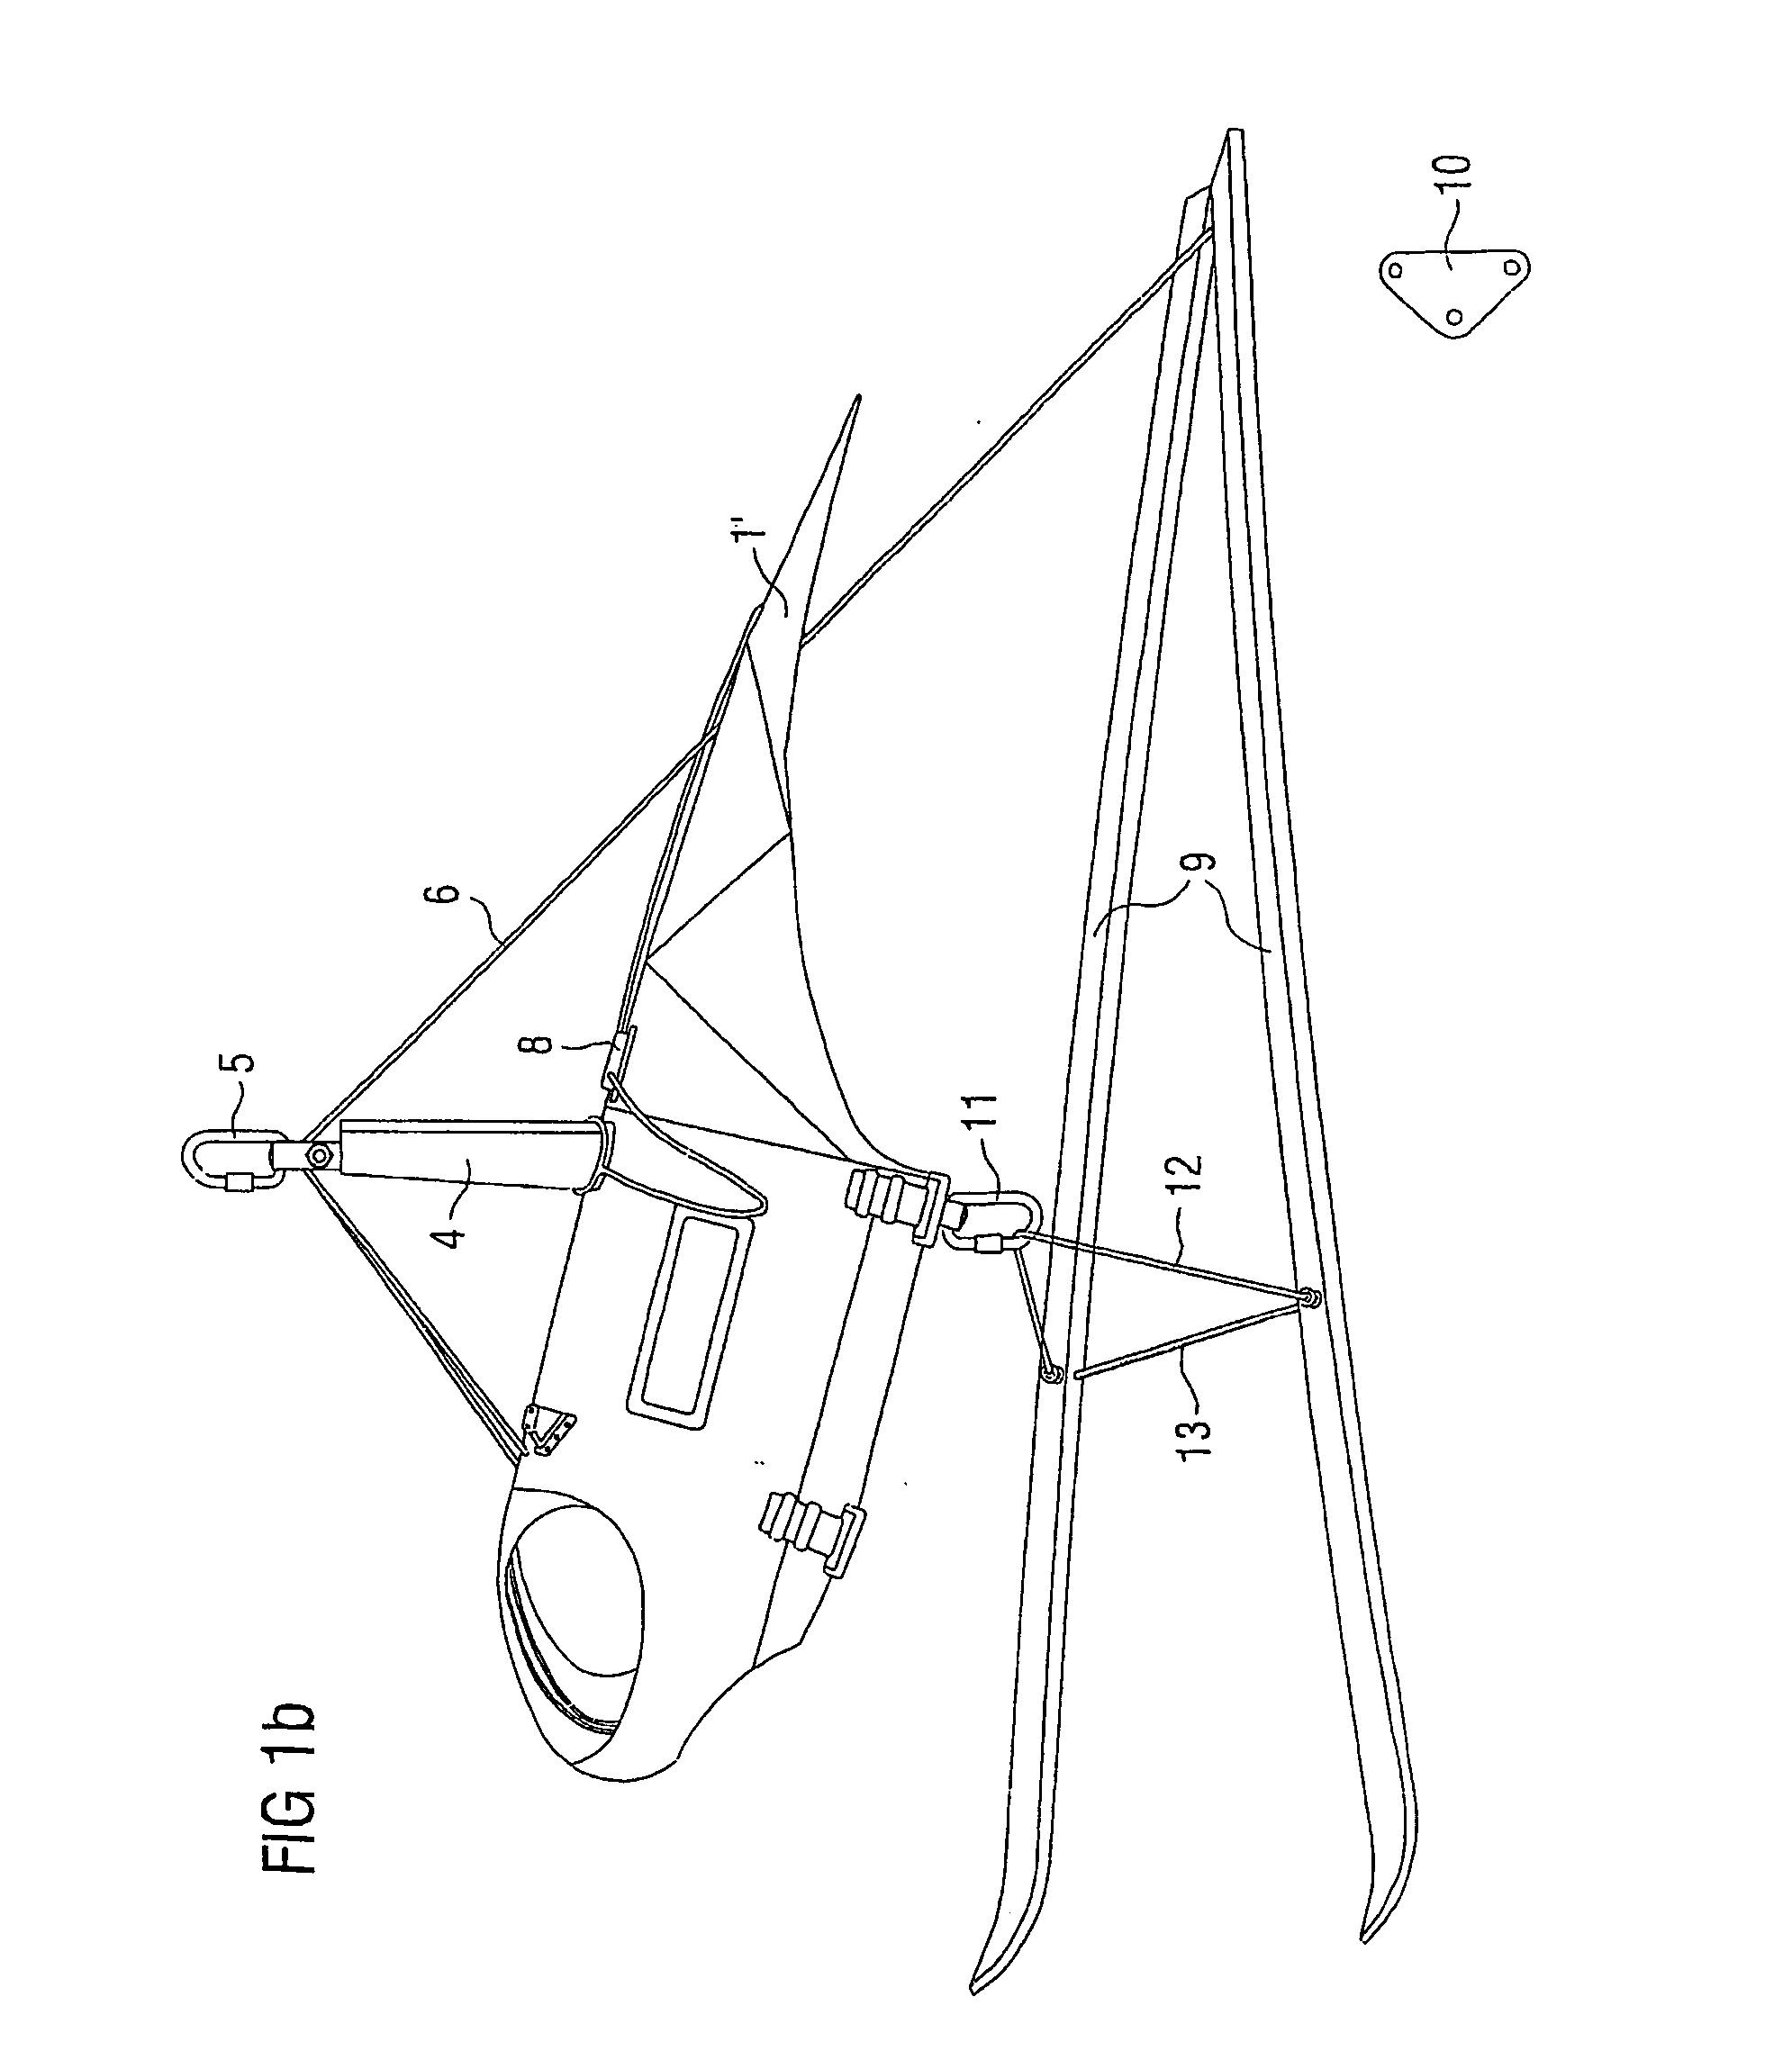 Demonstration device for flying sport devices